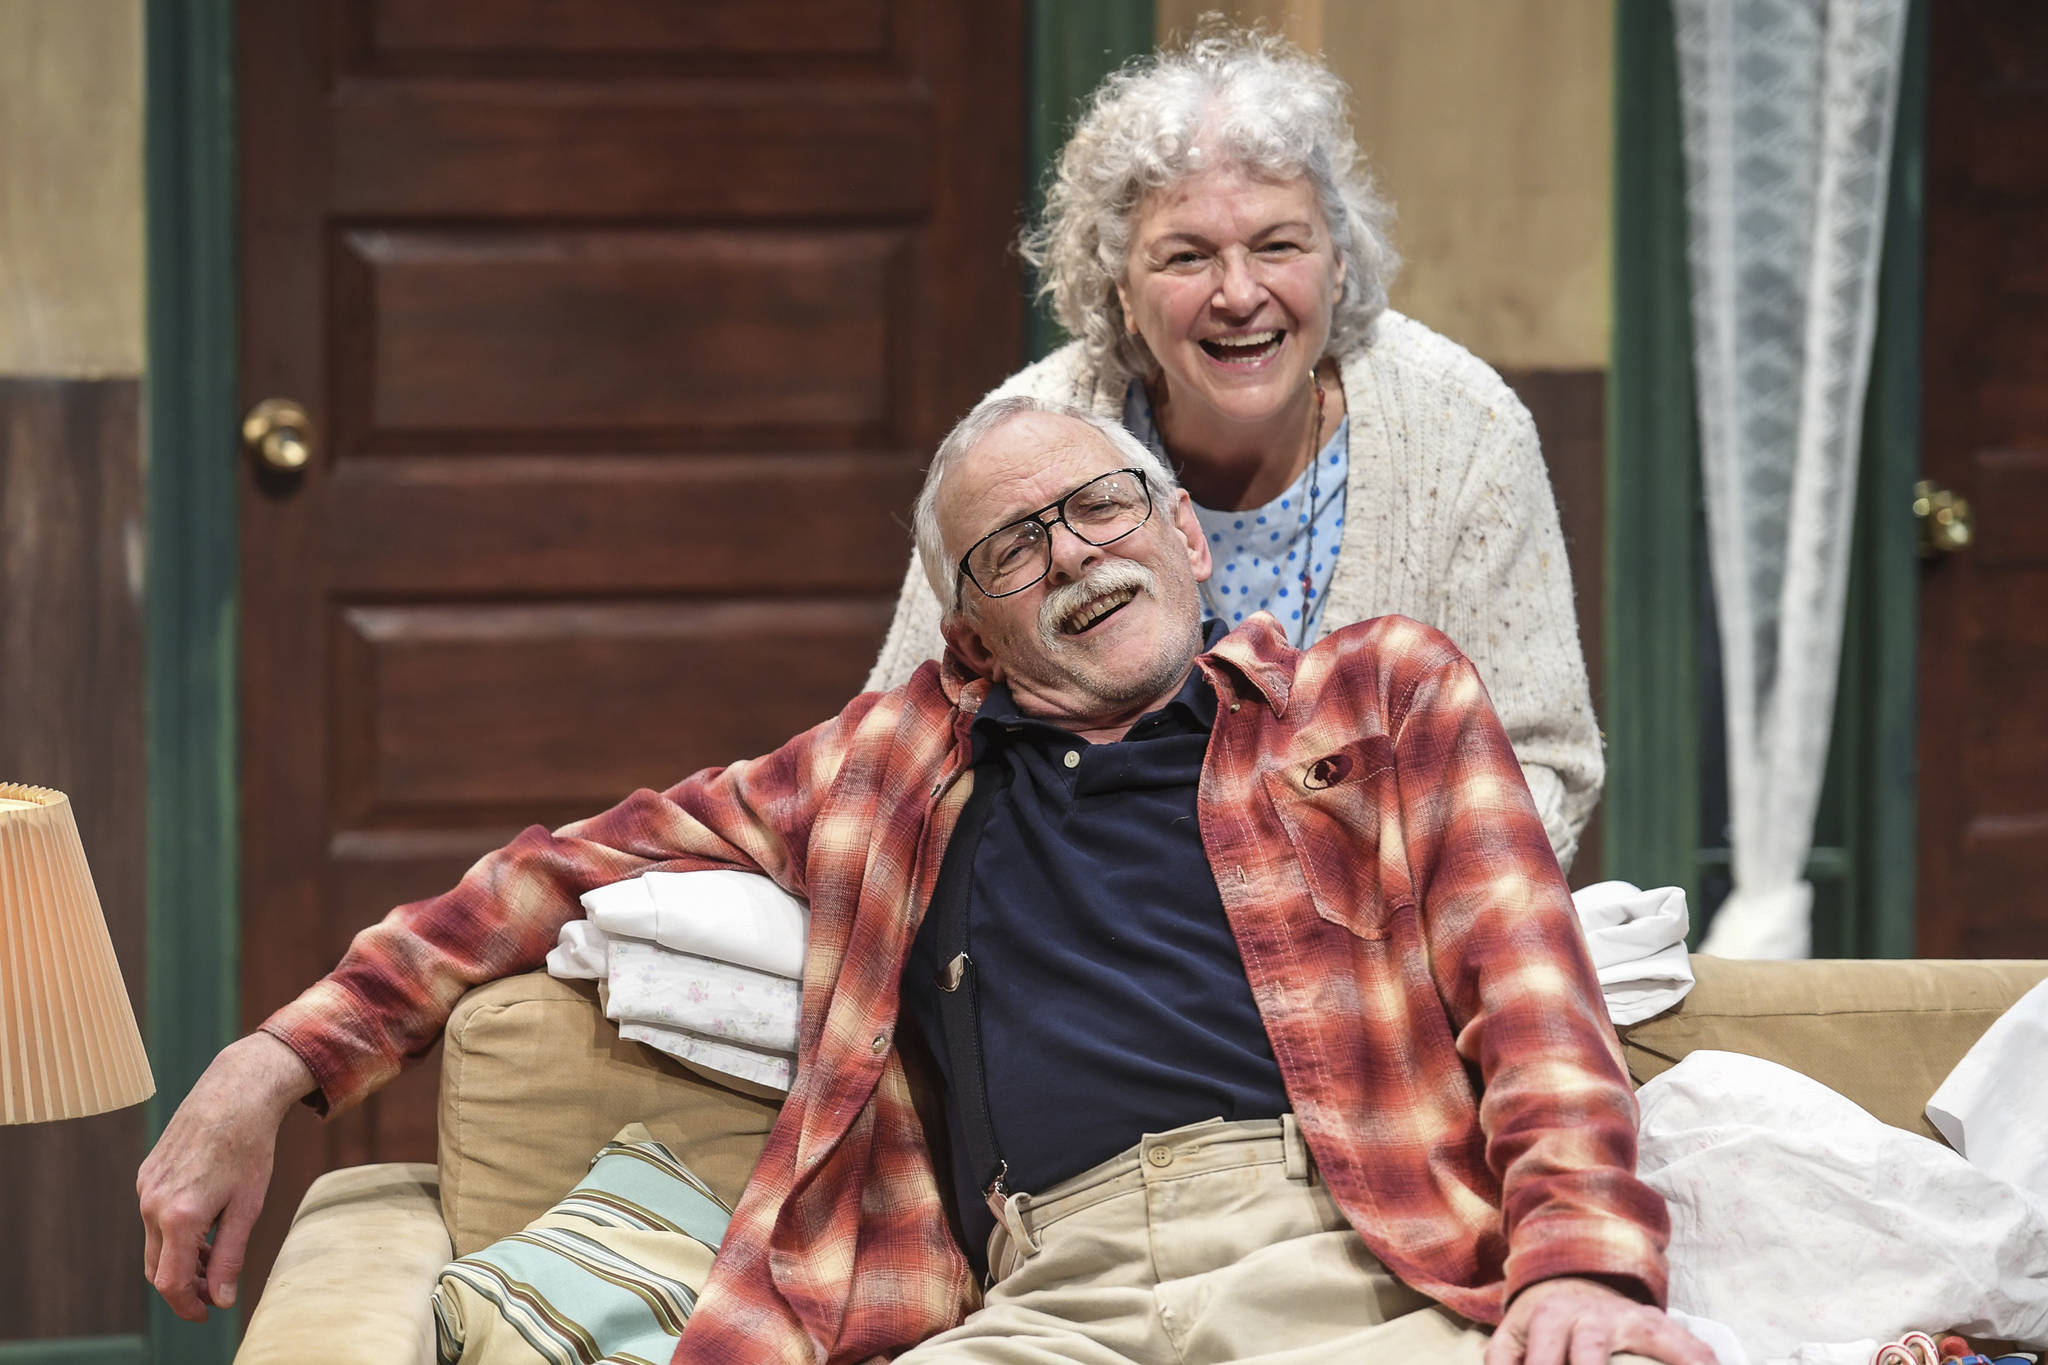 New play portrays end of life ‘With’ unlikely laughs